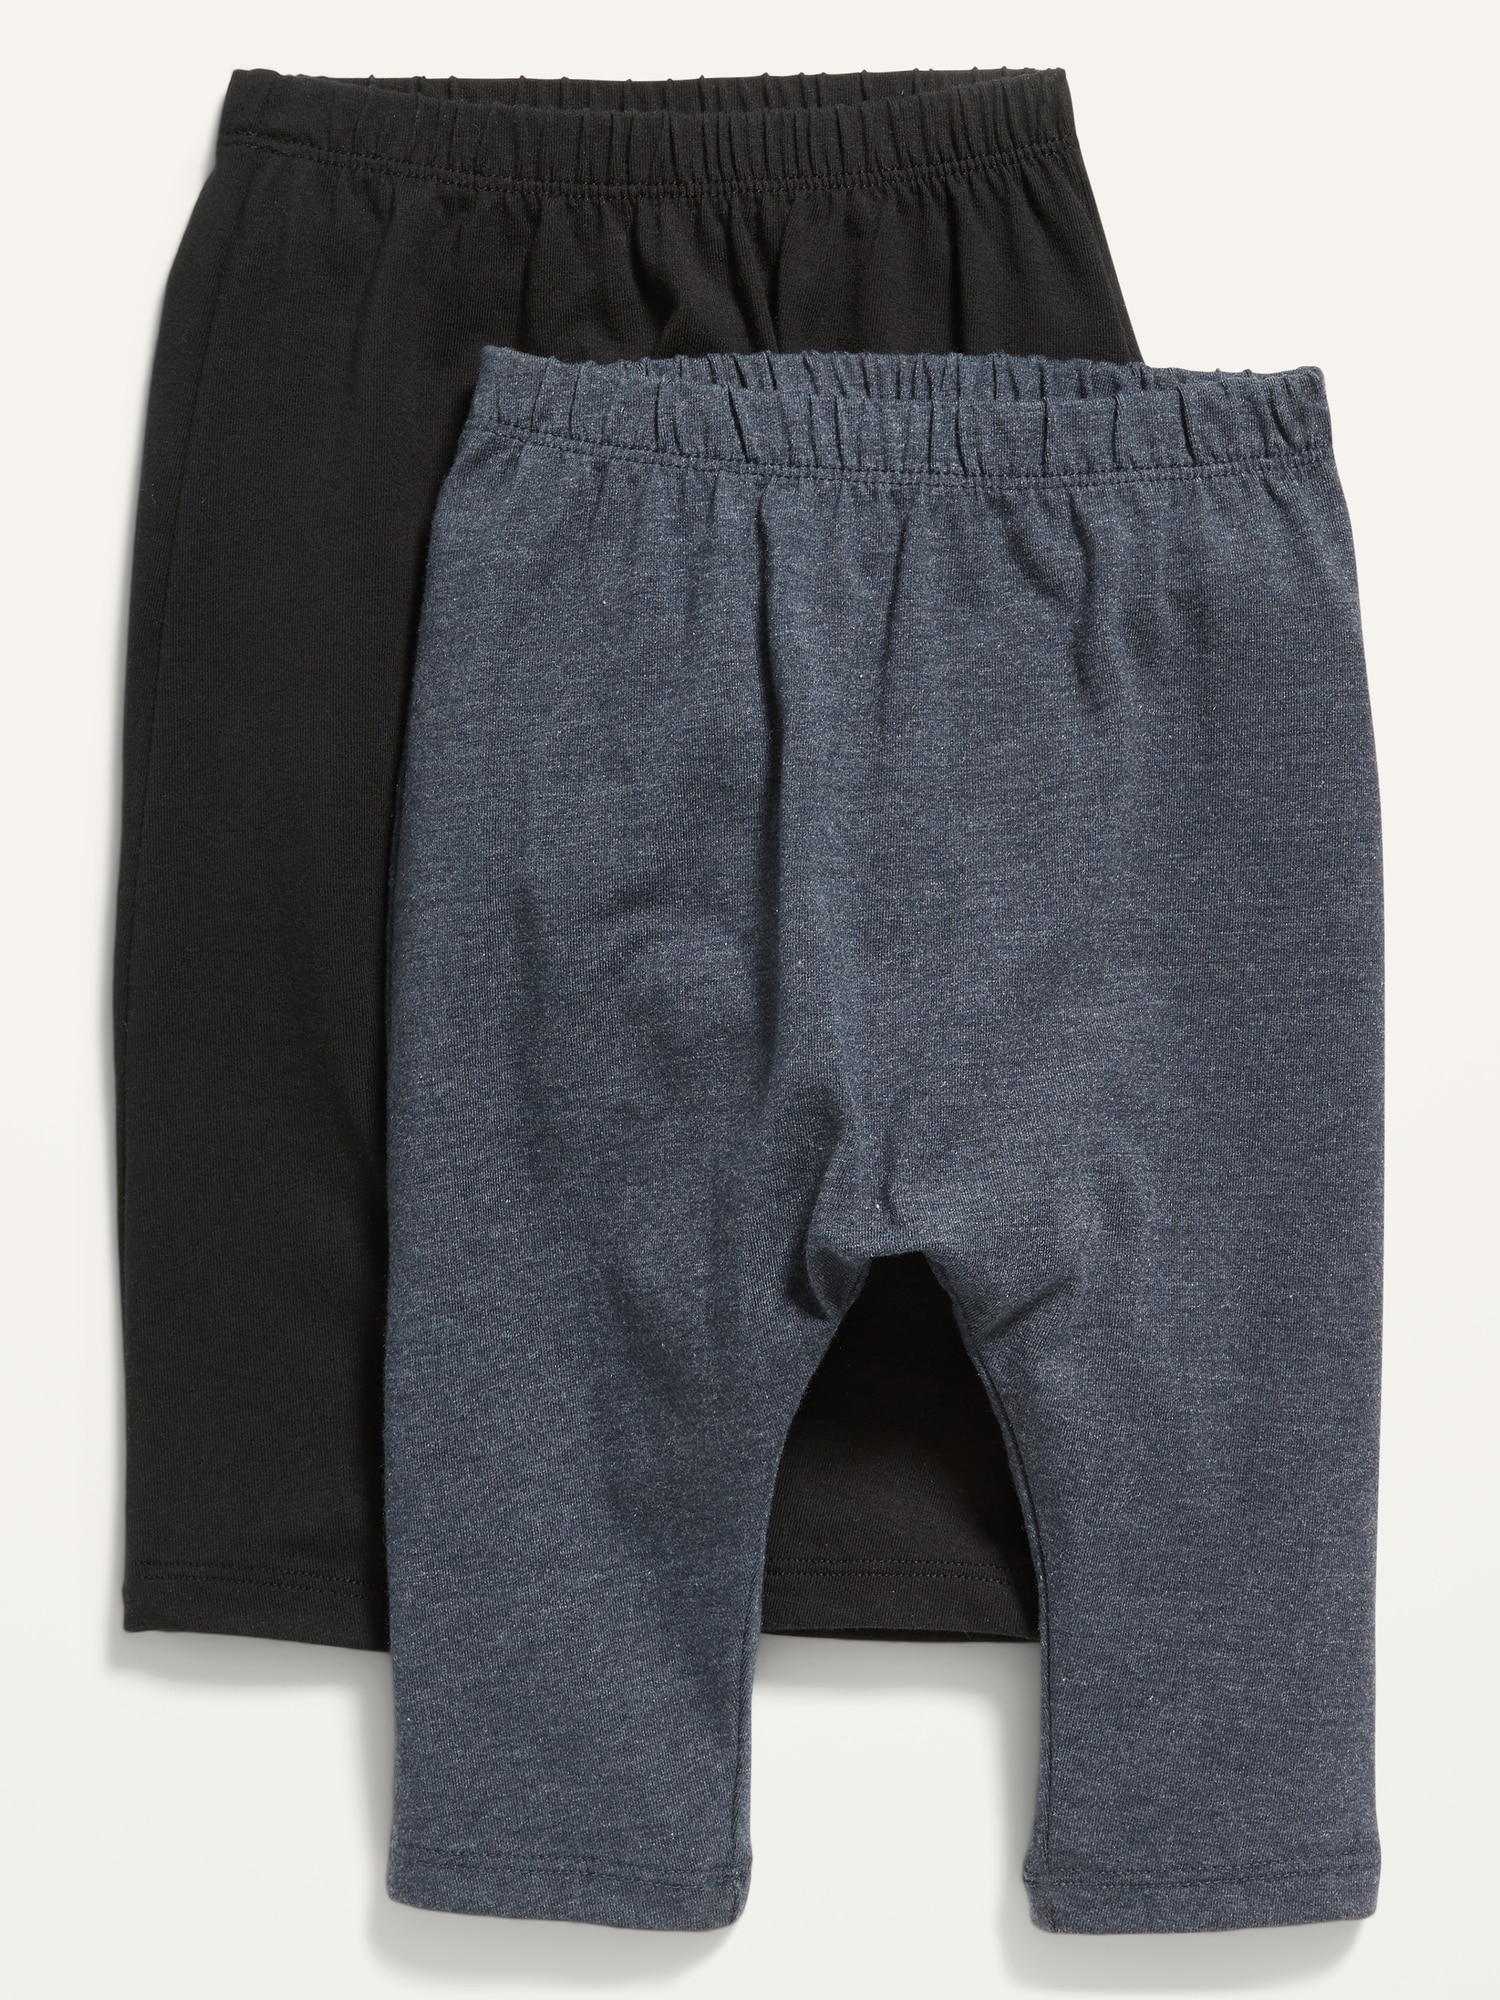 Unisex U-Shaped Jersey Pants 2-Pack for Baby | Old Navy